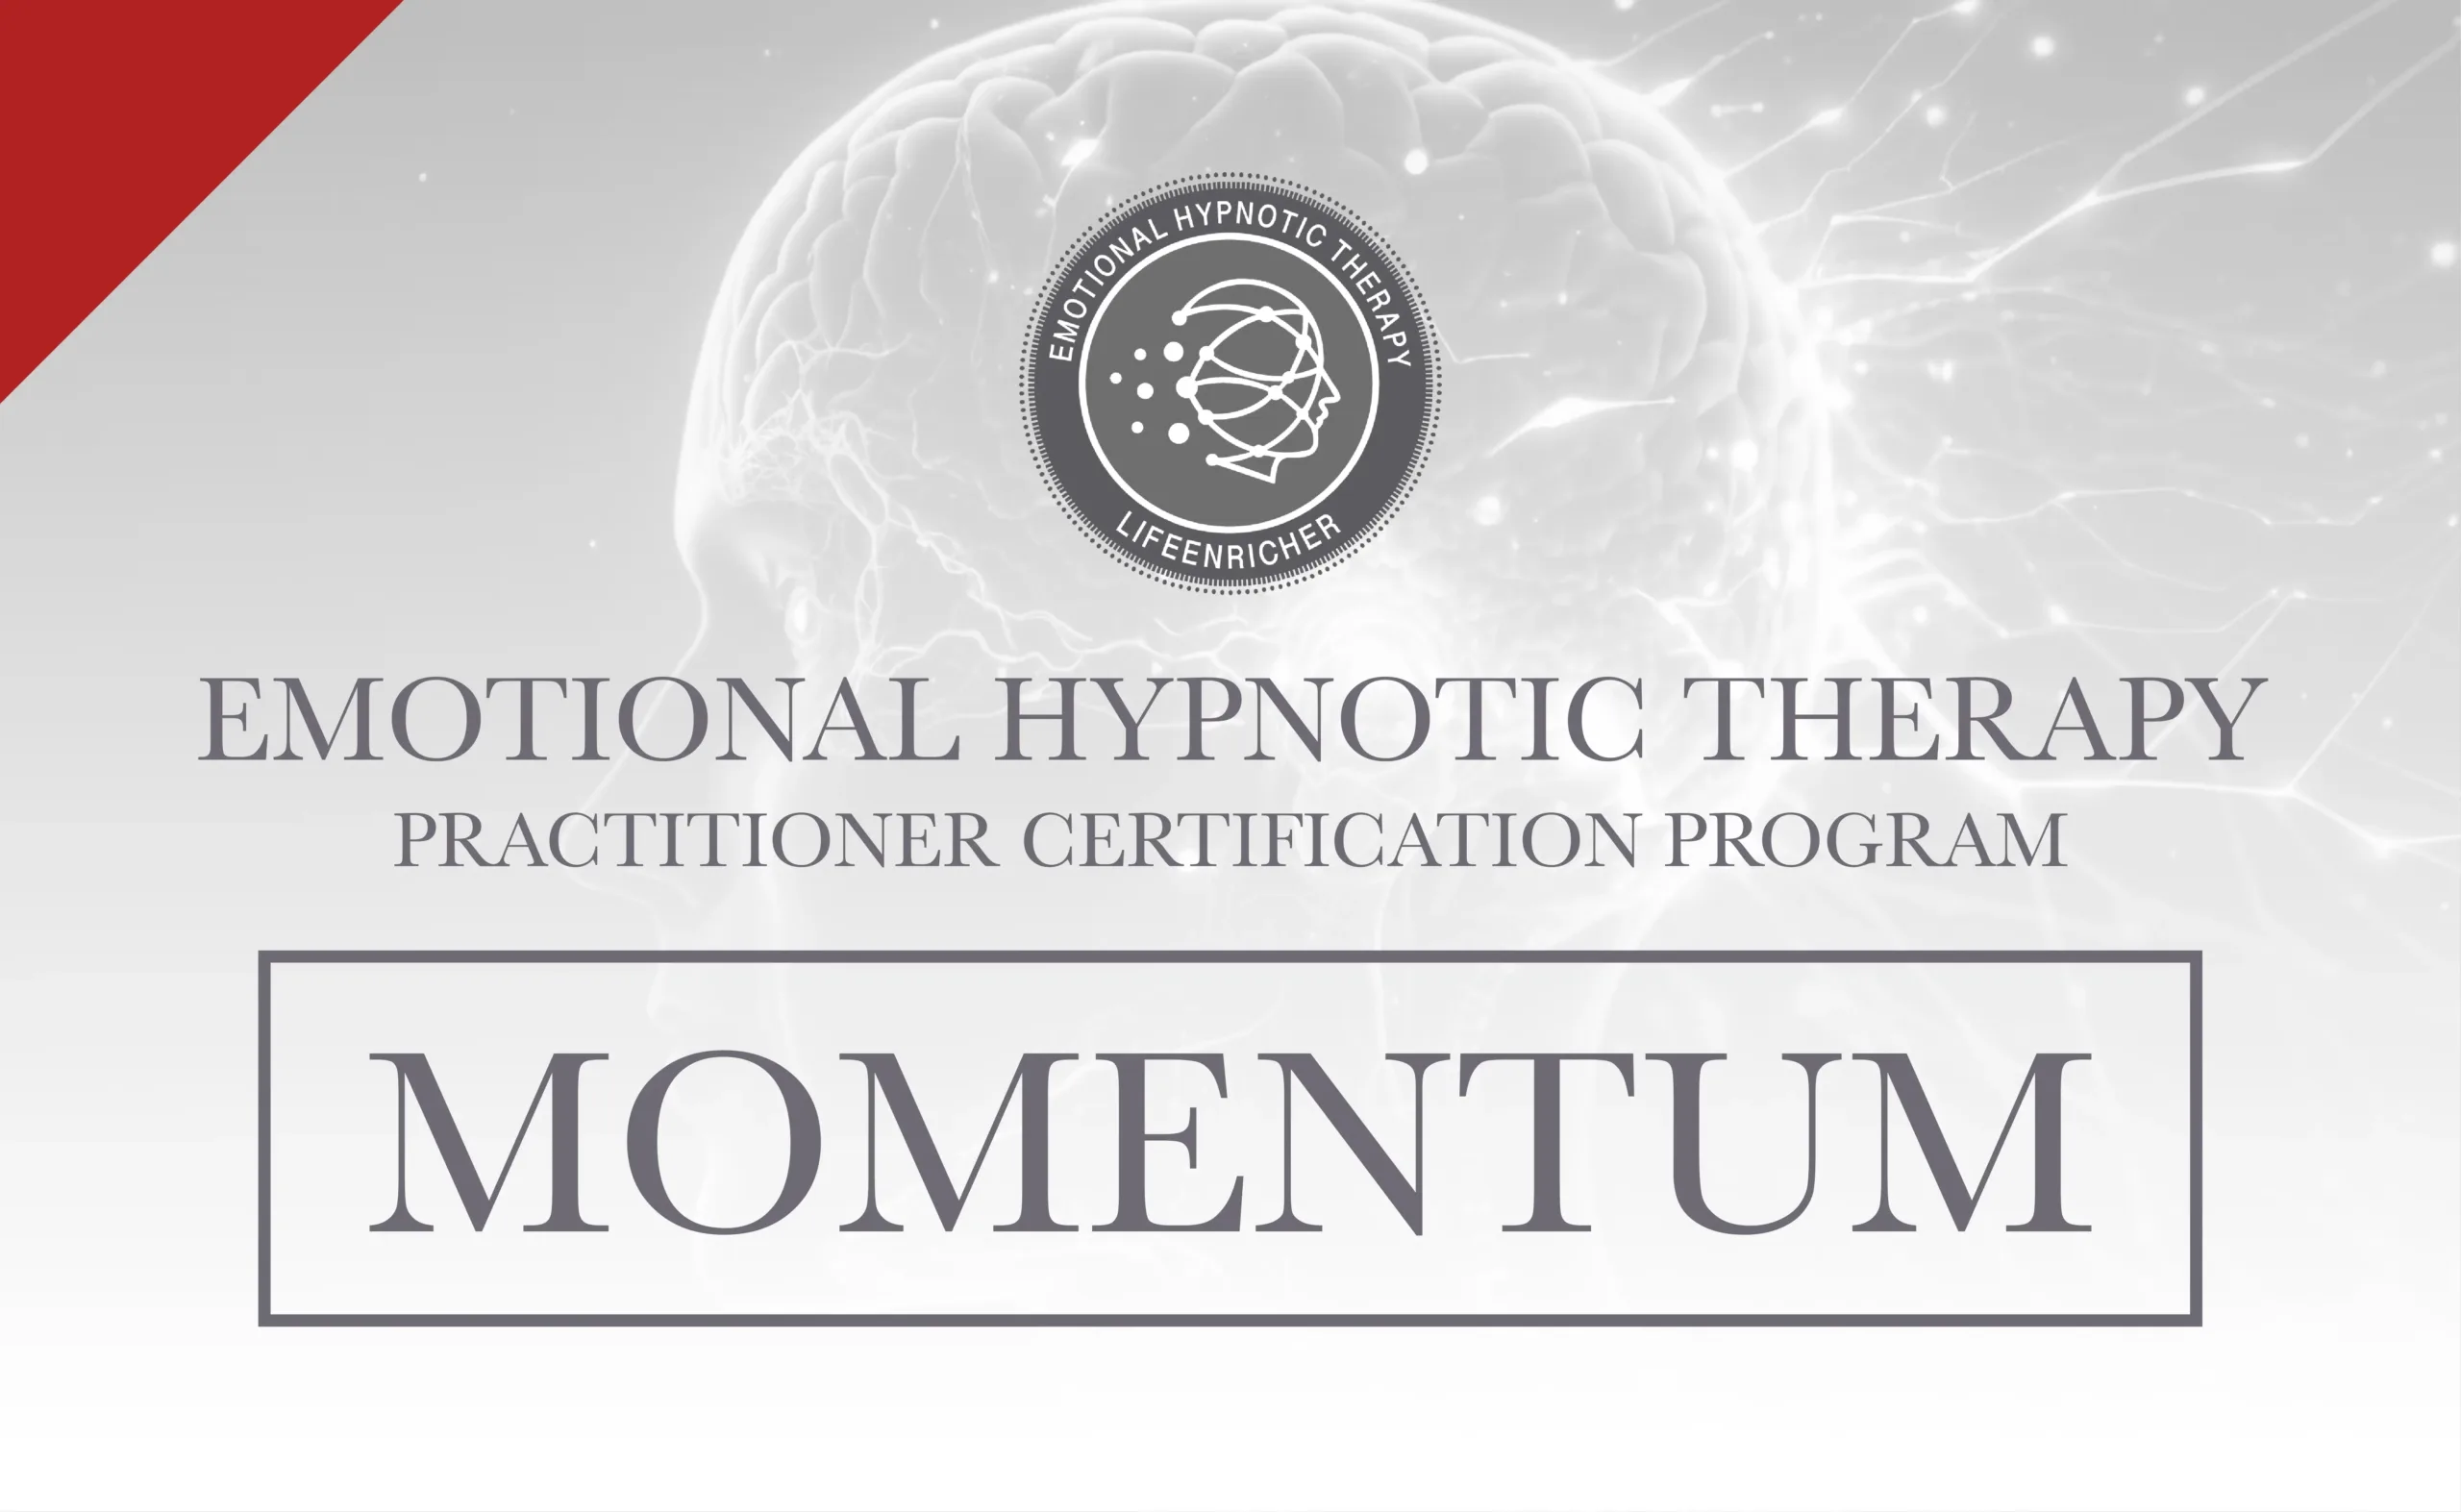 Emotional Hypnotic Therapy Practitioner – MOMENTUM